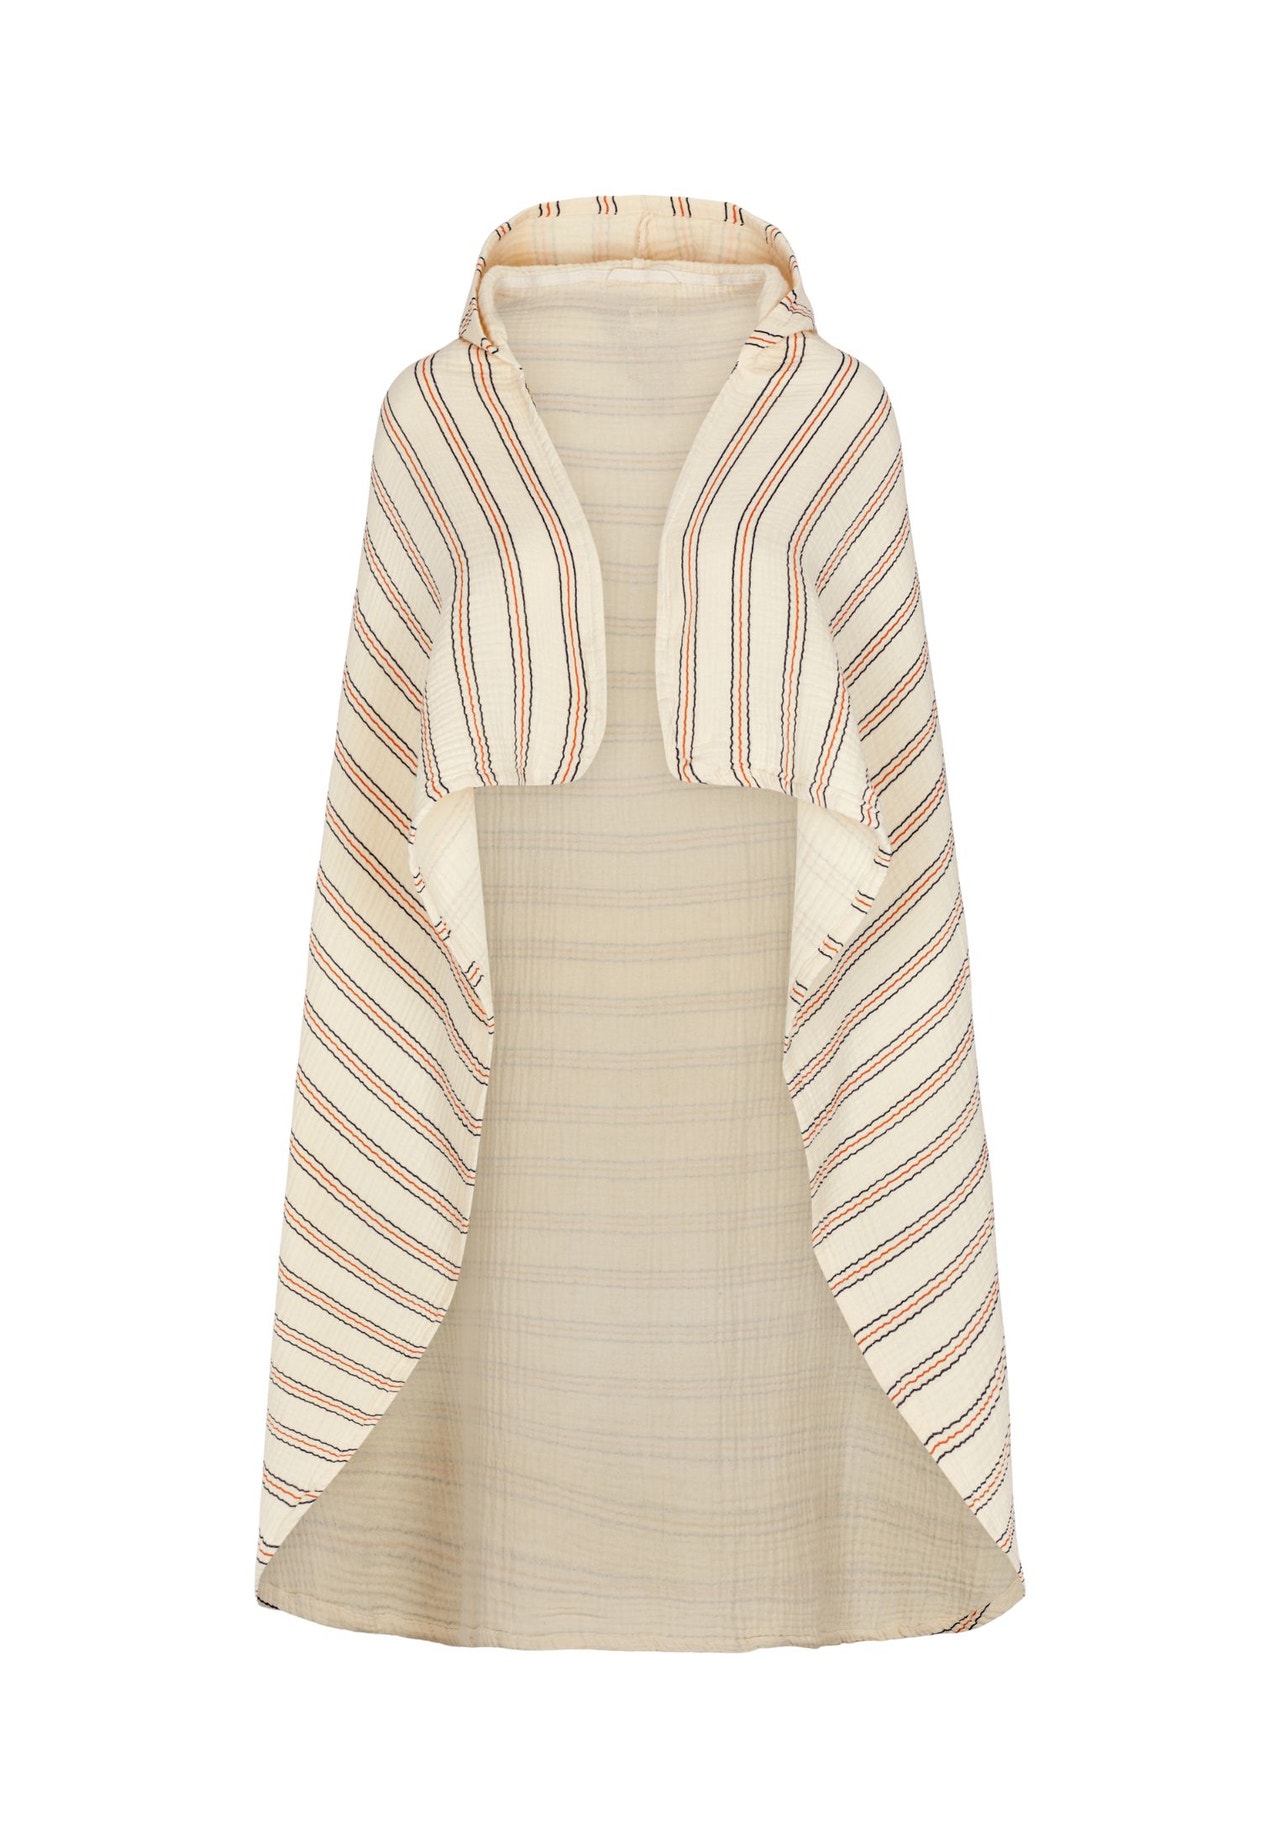 MAMA.LICIOUS Baby-håndkle -Seed Pearl stripes - 99999976